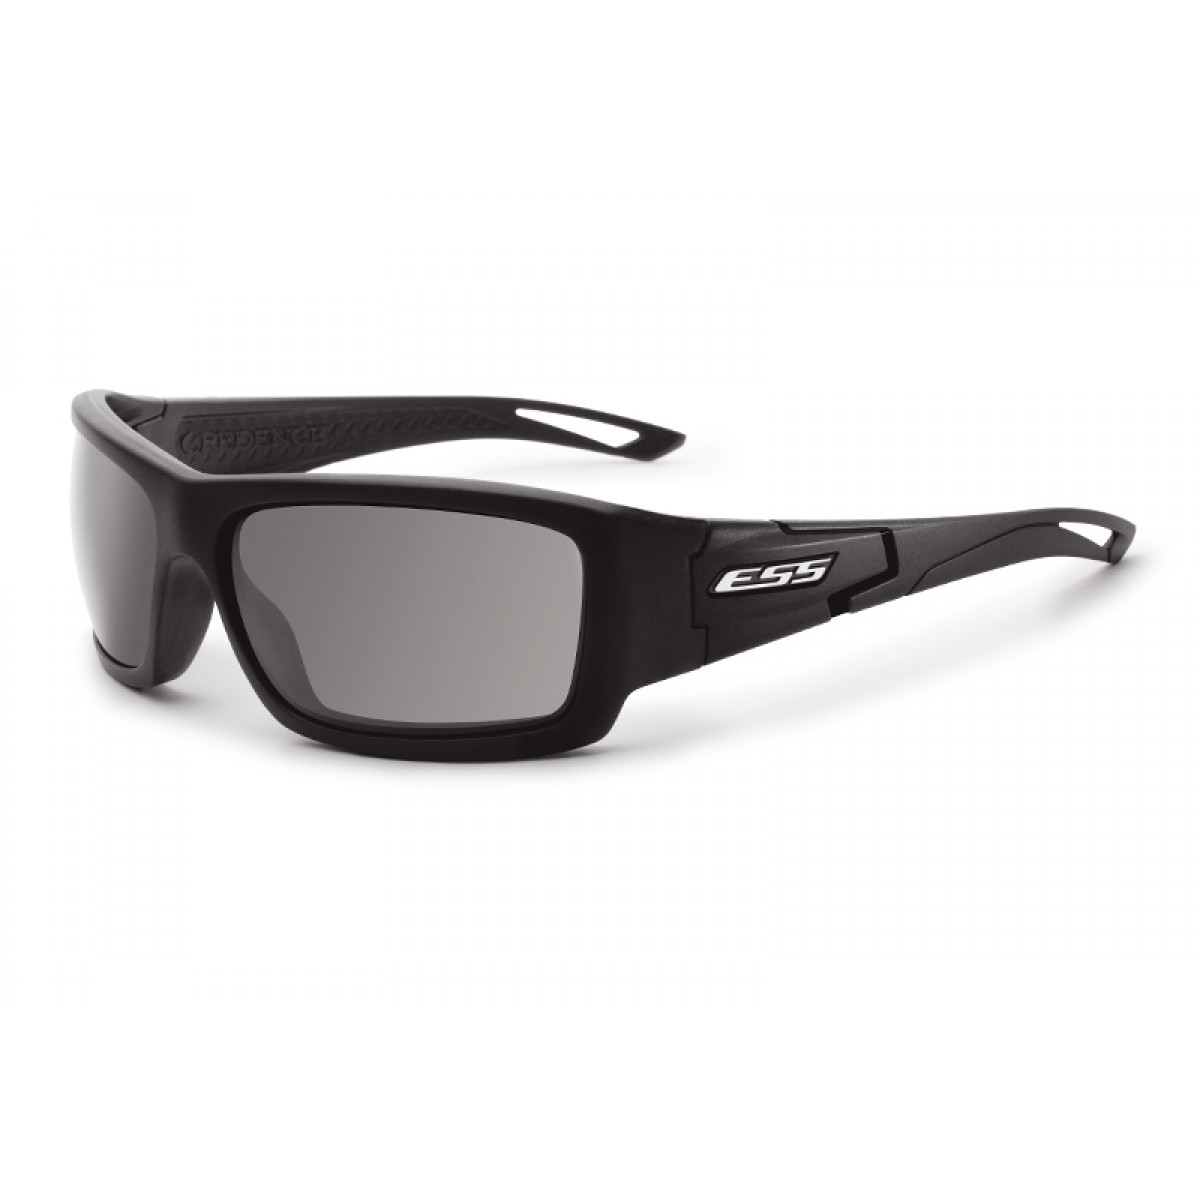 ess_credence_sunglasses_black_frame_with_smoke_gray_lenses_ee9015-04